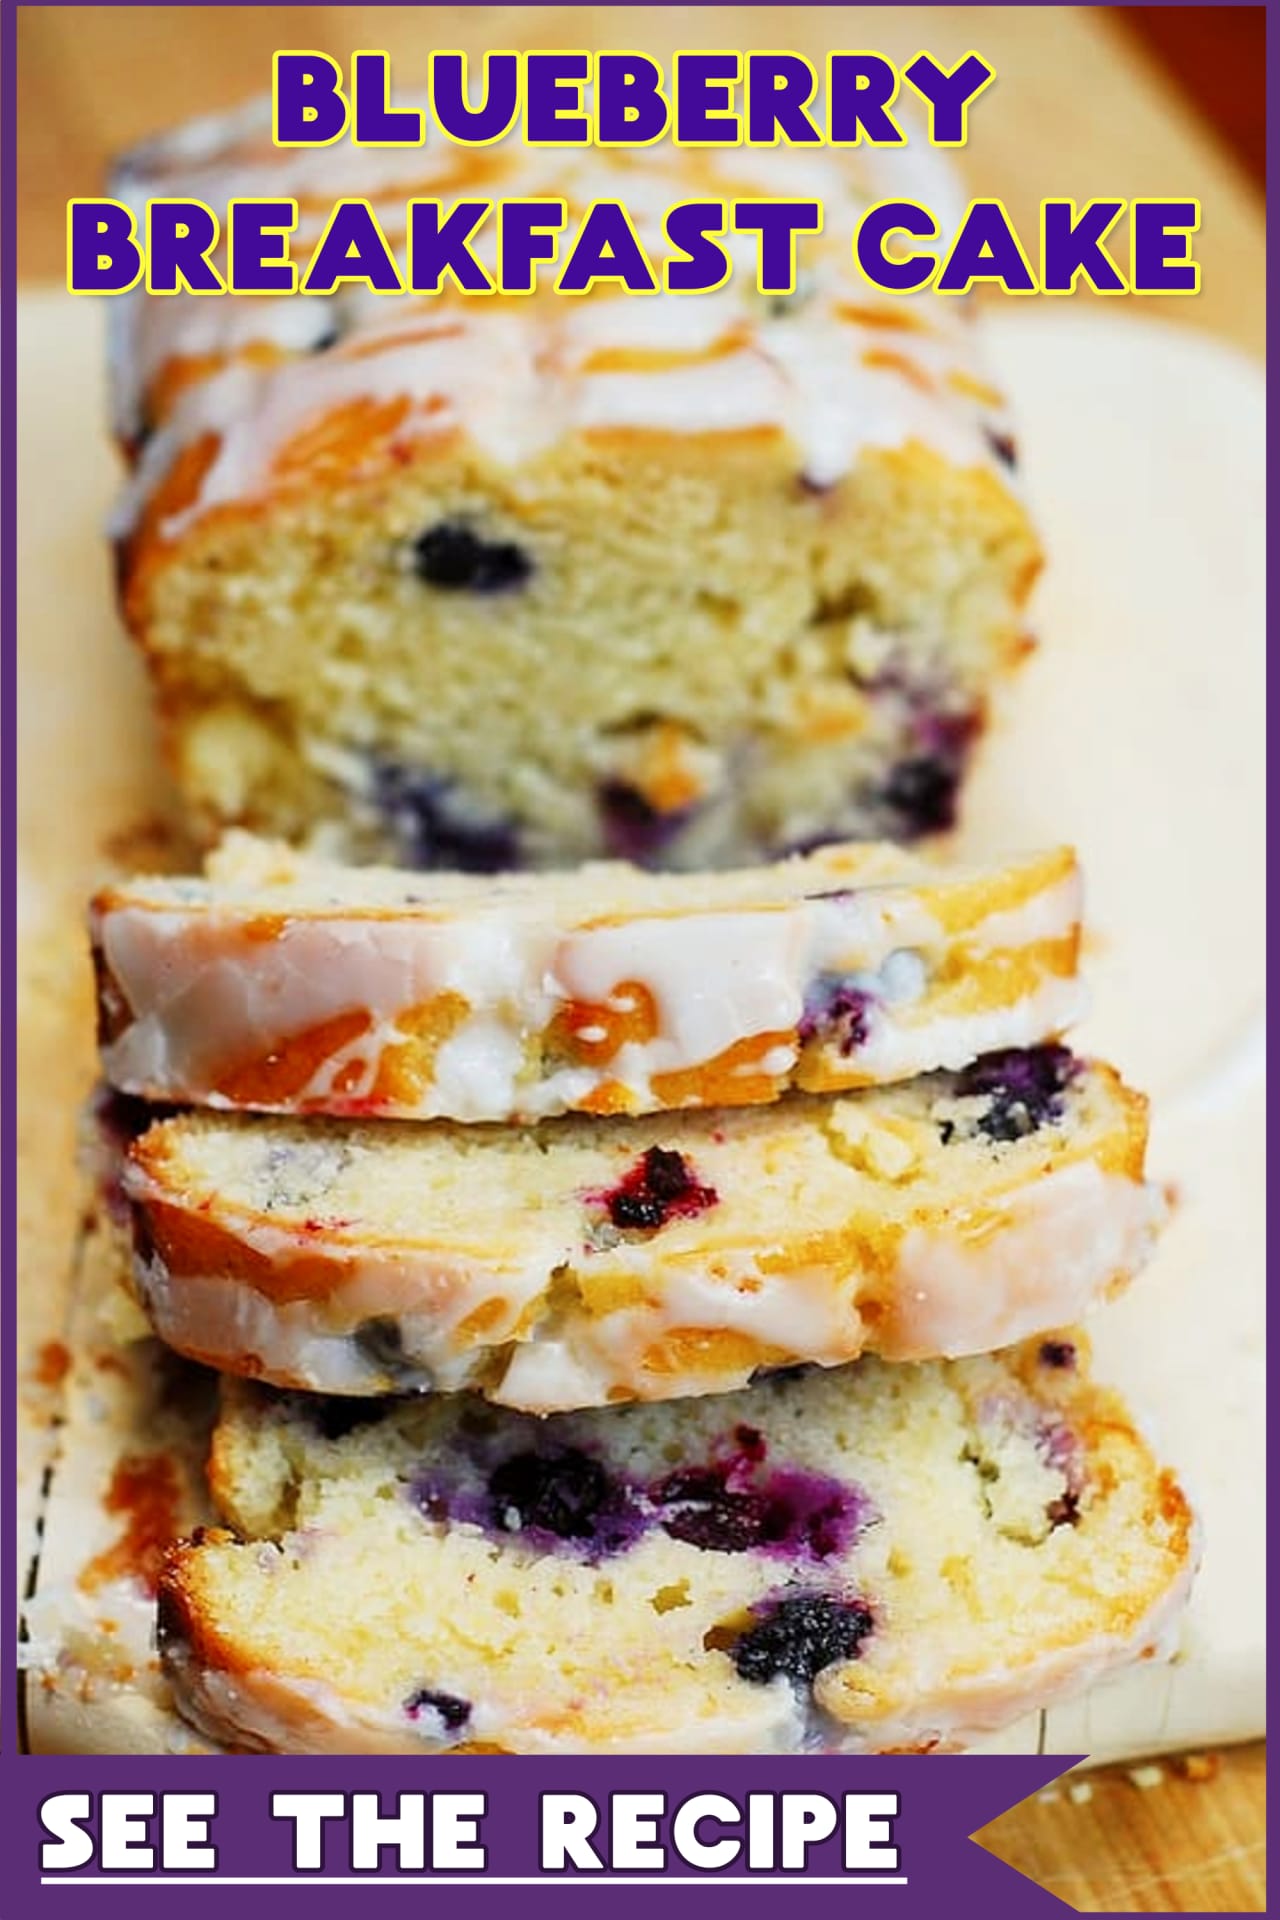 Blueberry recipes - easy blueberry breakfast cake recipe and more easy make ahead breakfast recipes for a crowd or for easy brunch food ideas.  Simple make ahead breakfast to keep in your freezer - also is a great funeral food idea for comforting food to make or take to a grieving family to show your sympathy.